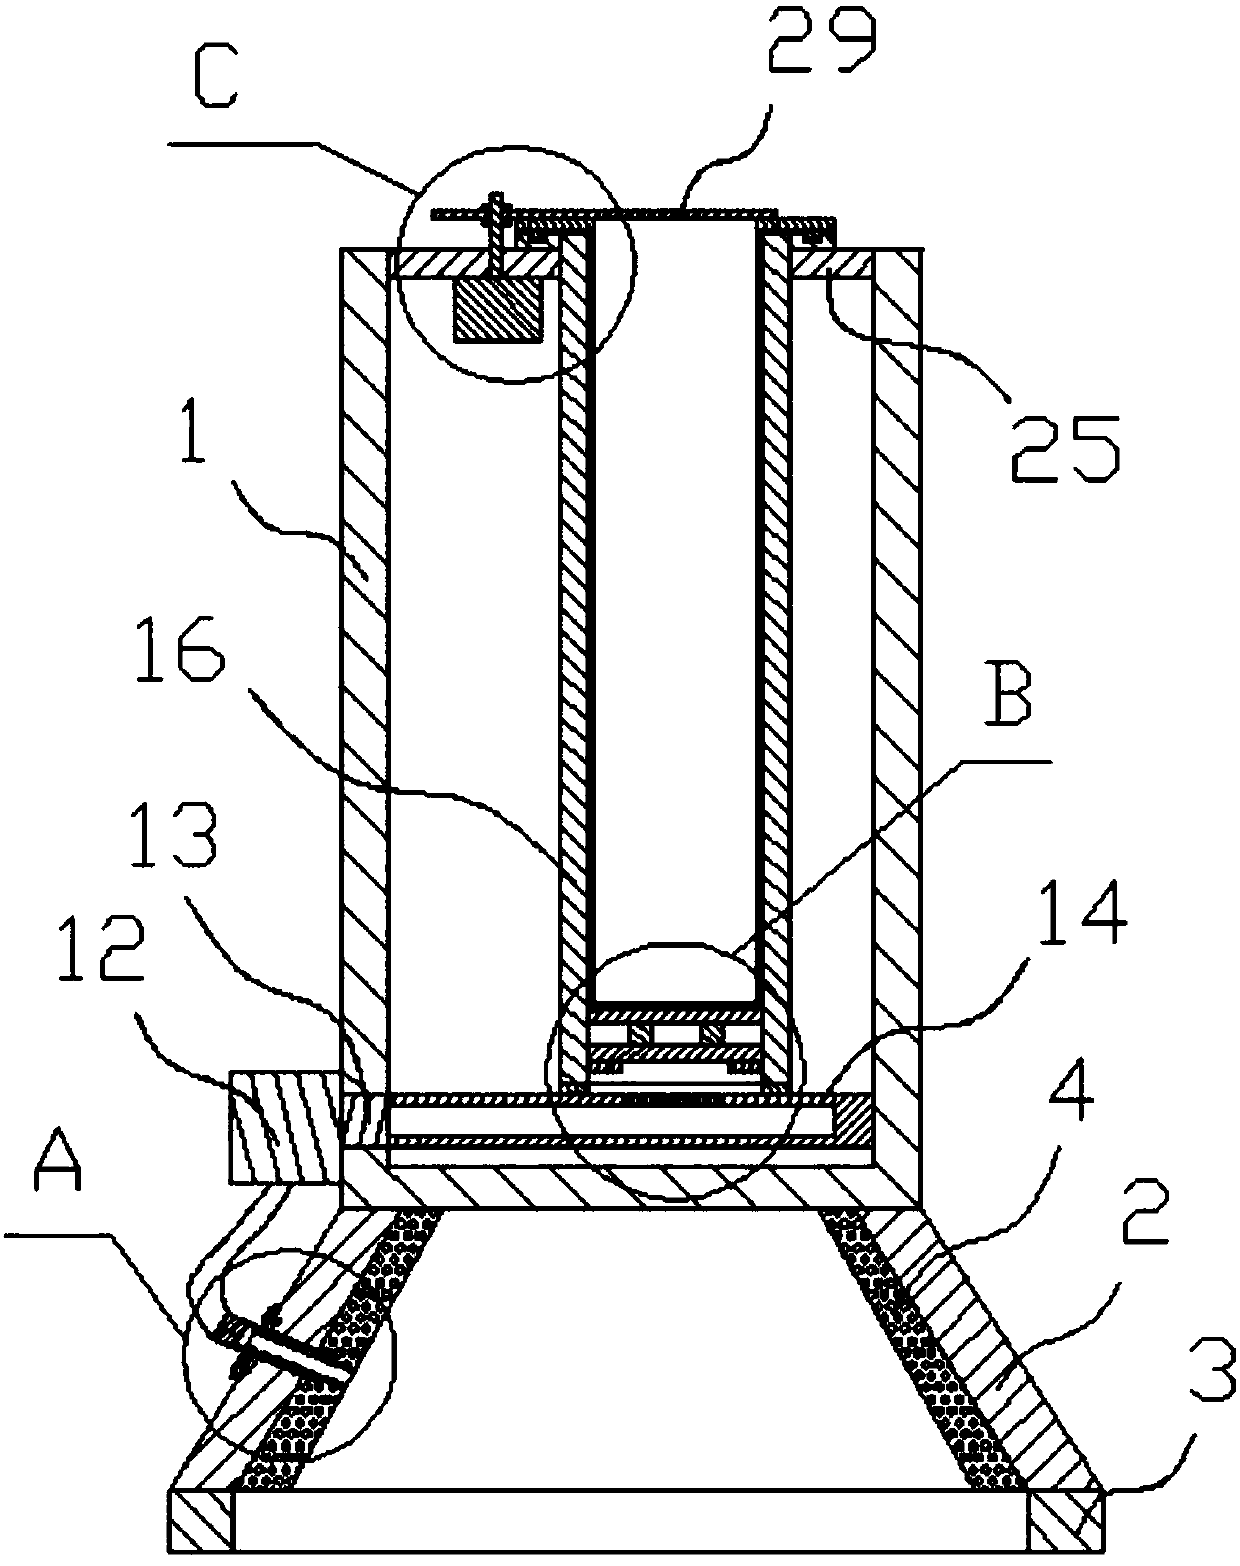 Toothpaste packaging mechanism capable of automatically extruding toothpaste quantitatively